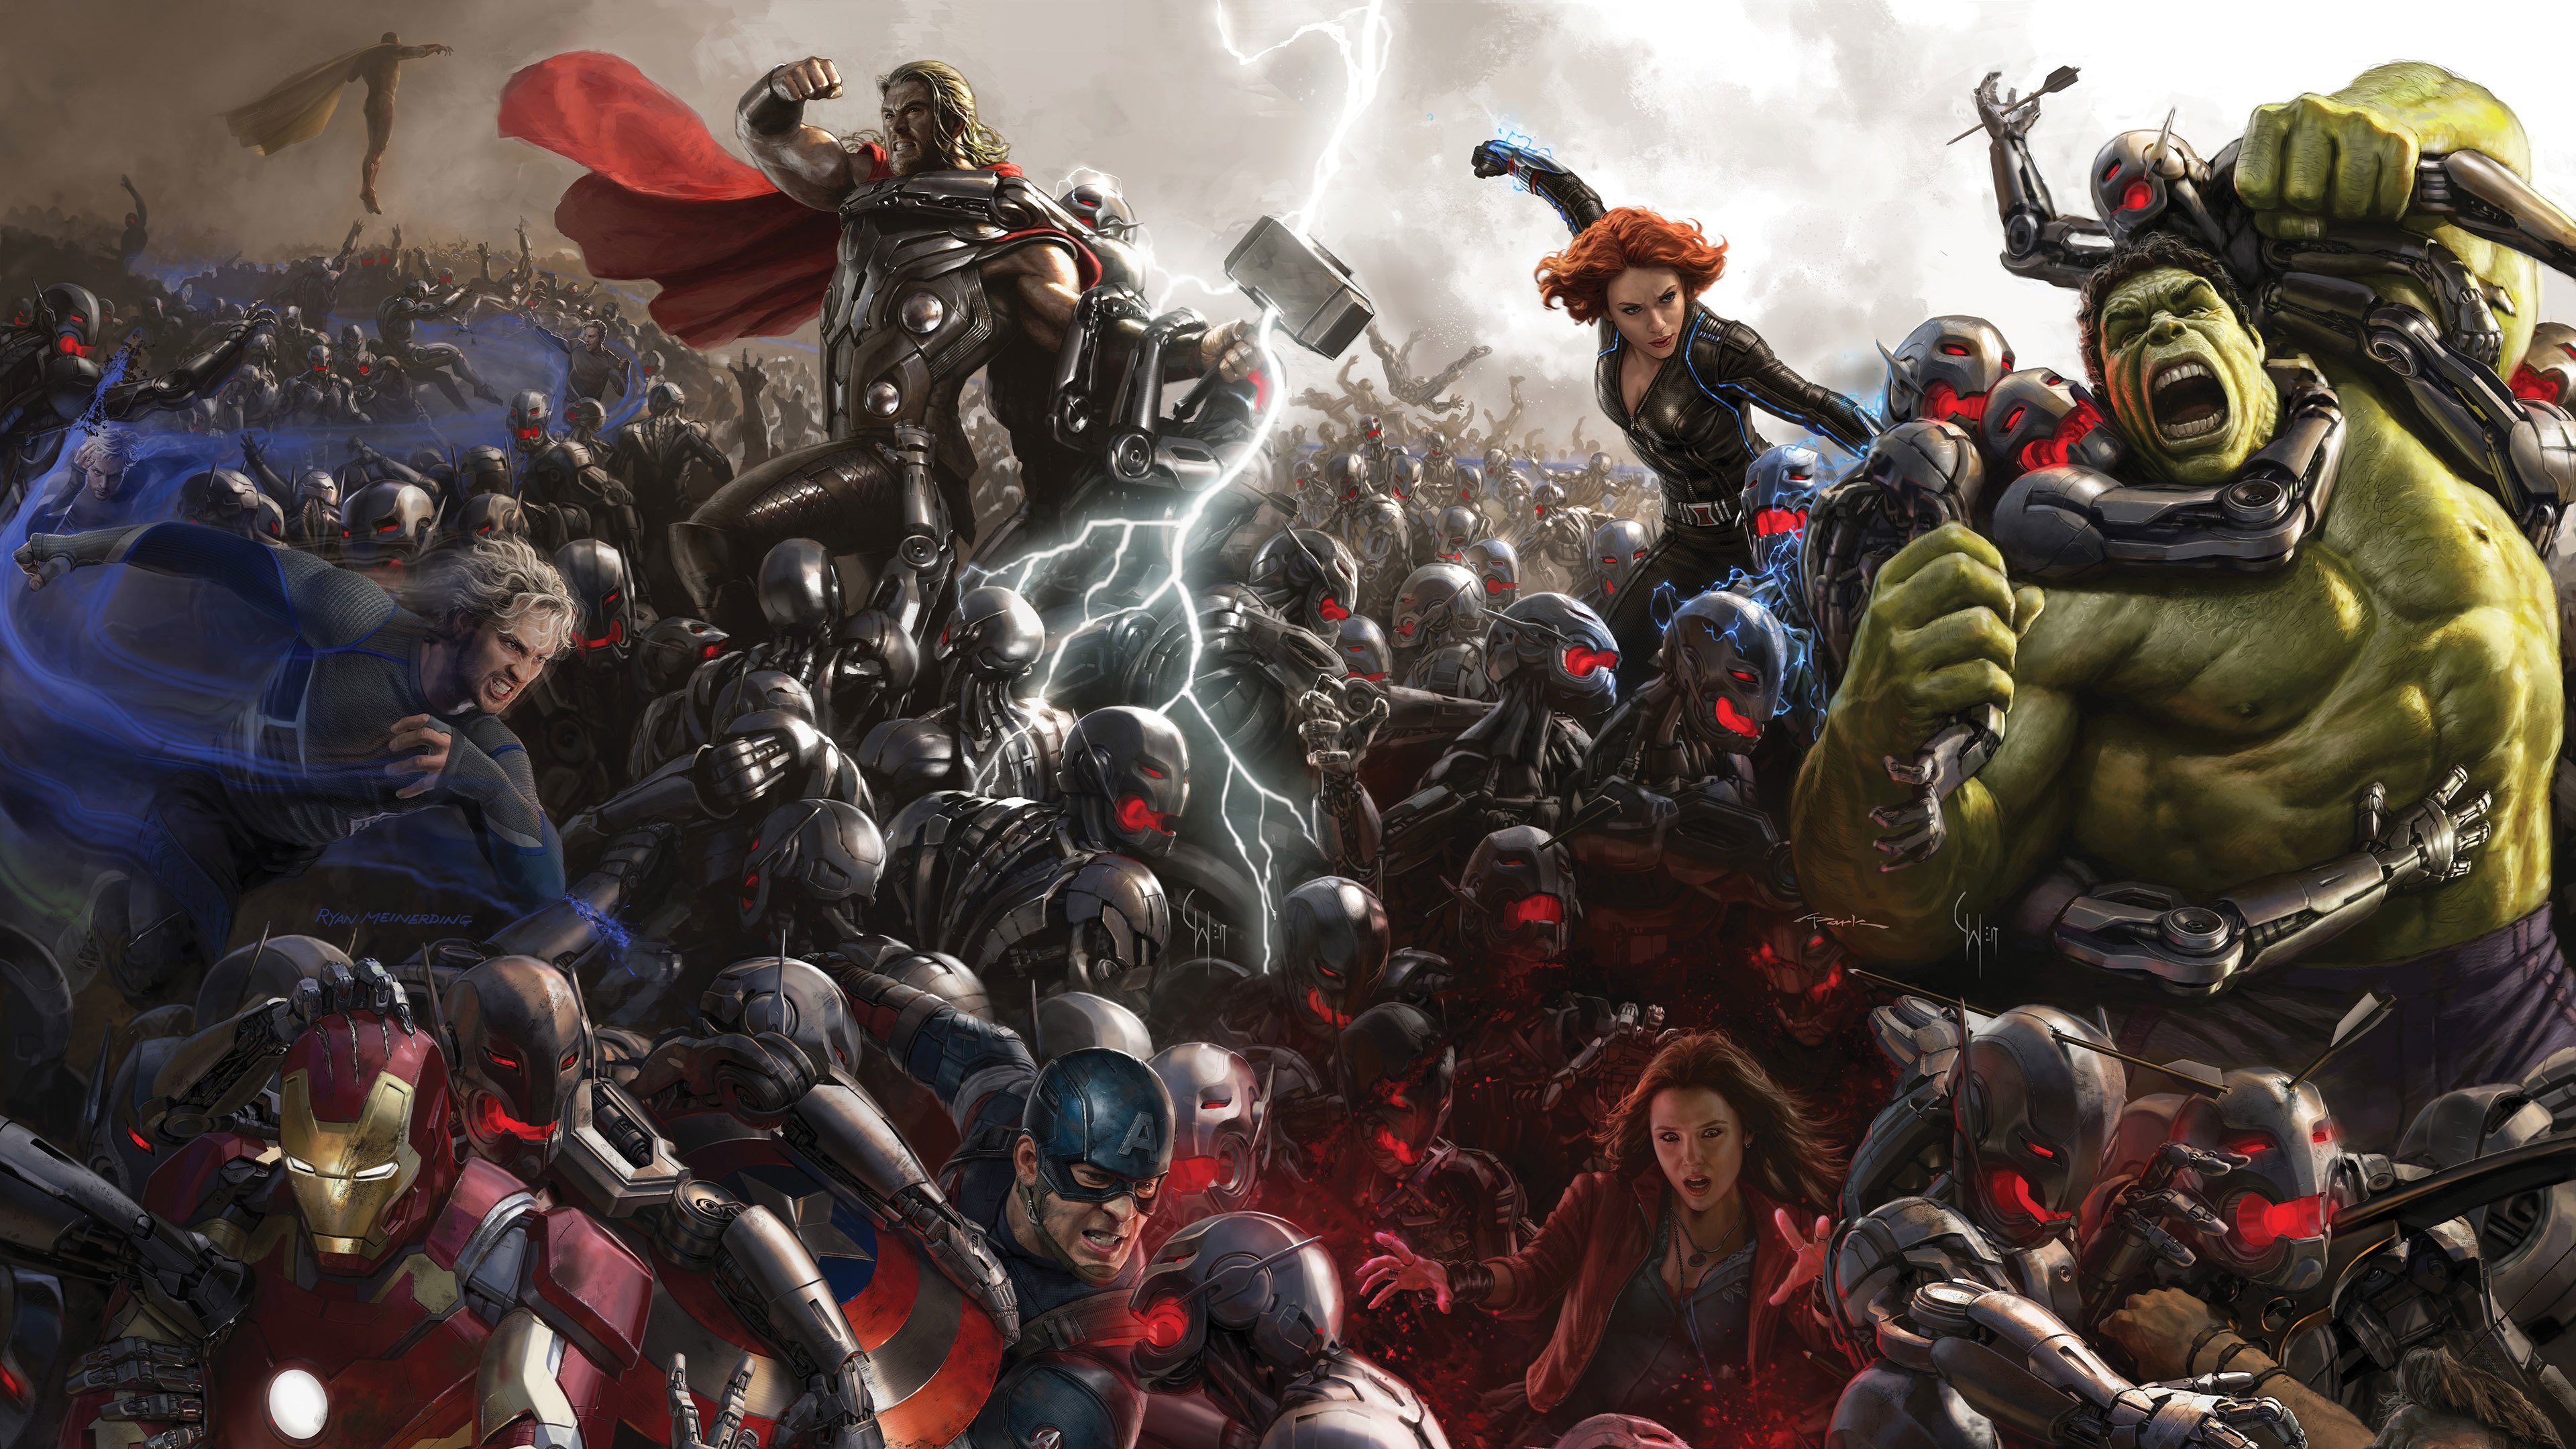 scarlet witch, hulk, captain america, quicksilver (marvel comics), movie, avengers: age of ultron, black widow, iron man, thor, vision (marvel comics), the avengers